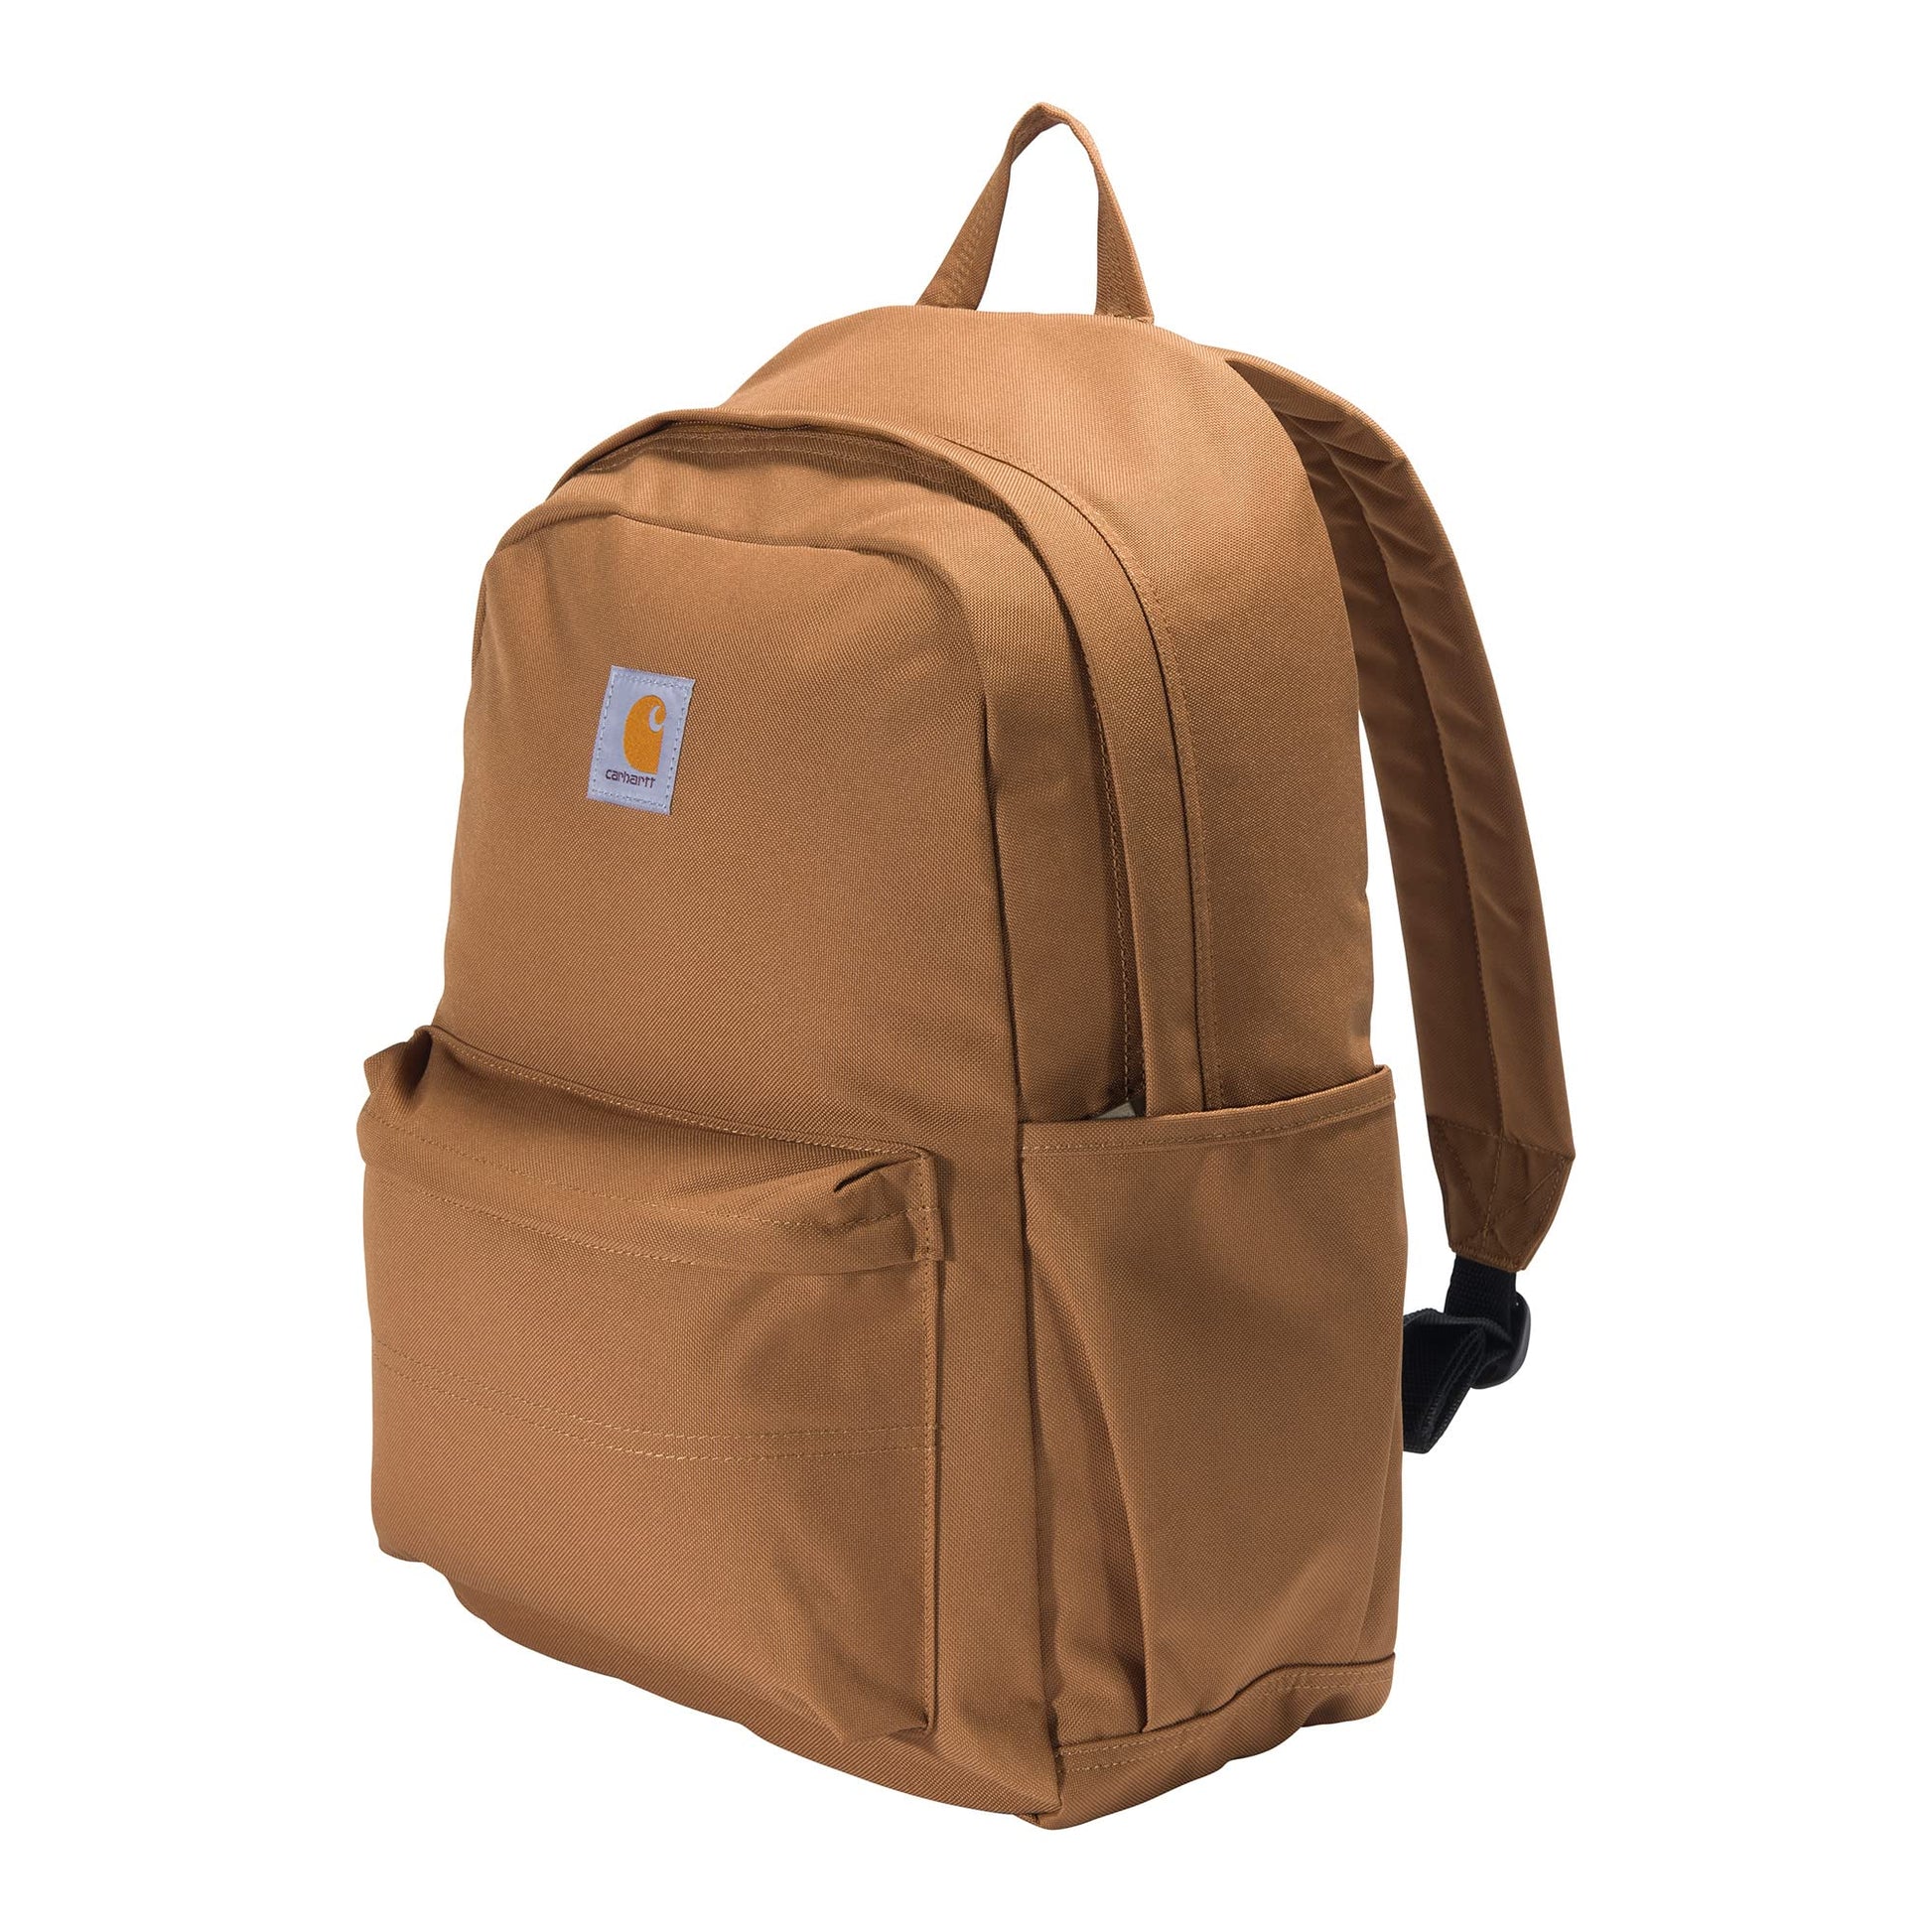 Carhartt Essentials Backpack with 15-inch Laptop Sleeve for Travel, Work and School